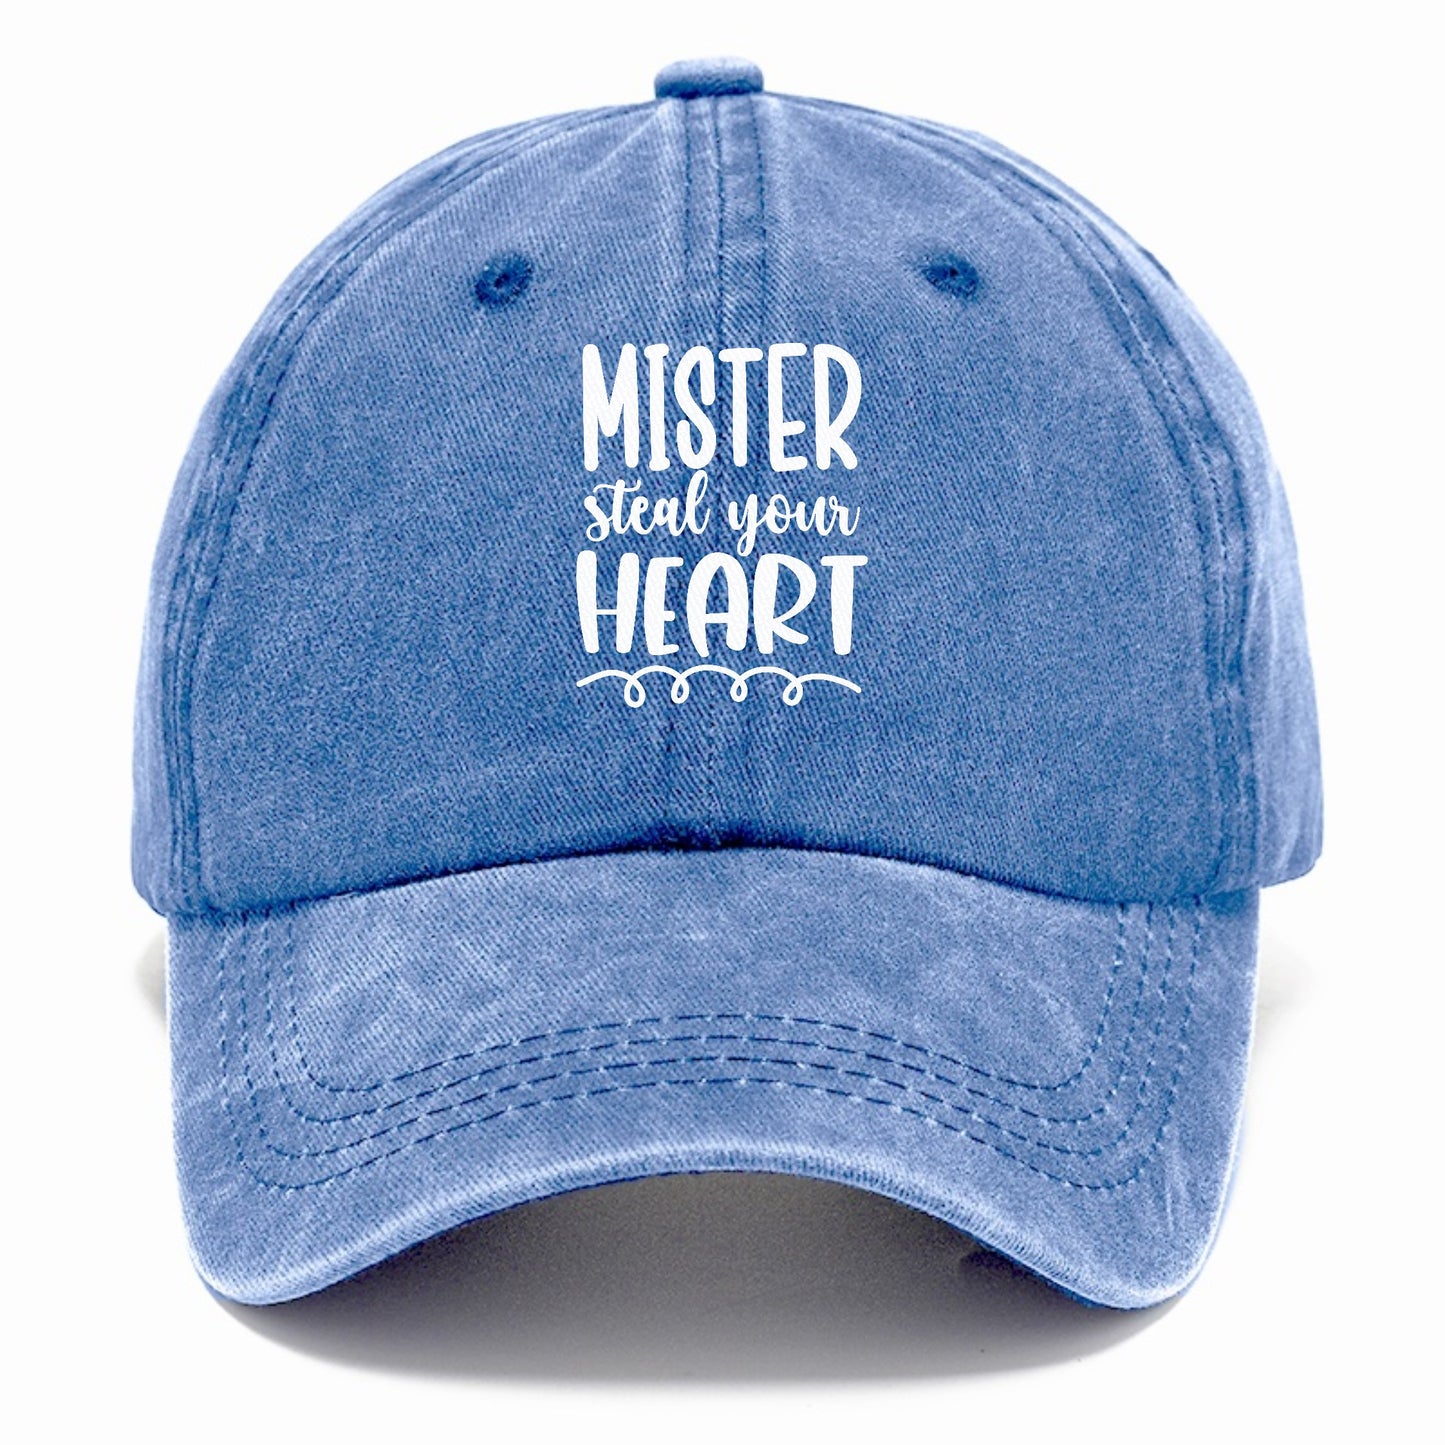 mister steal your heart Hat